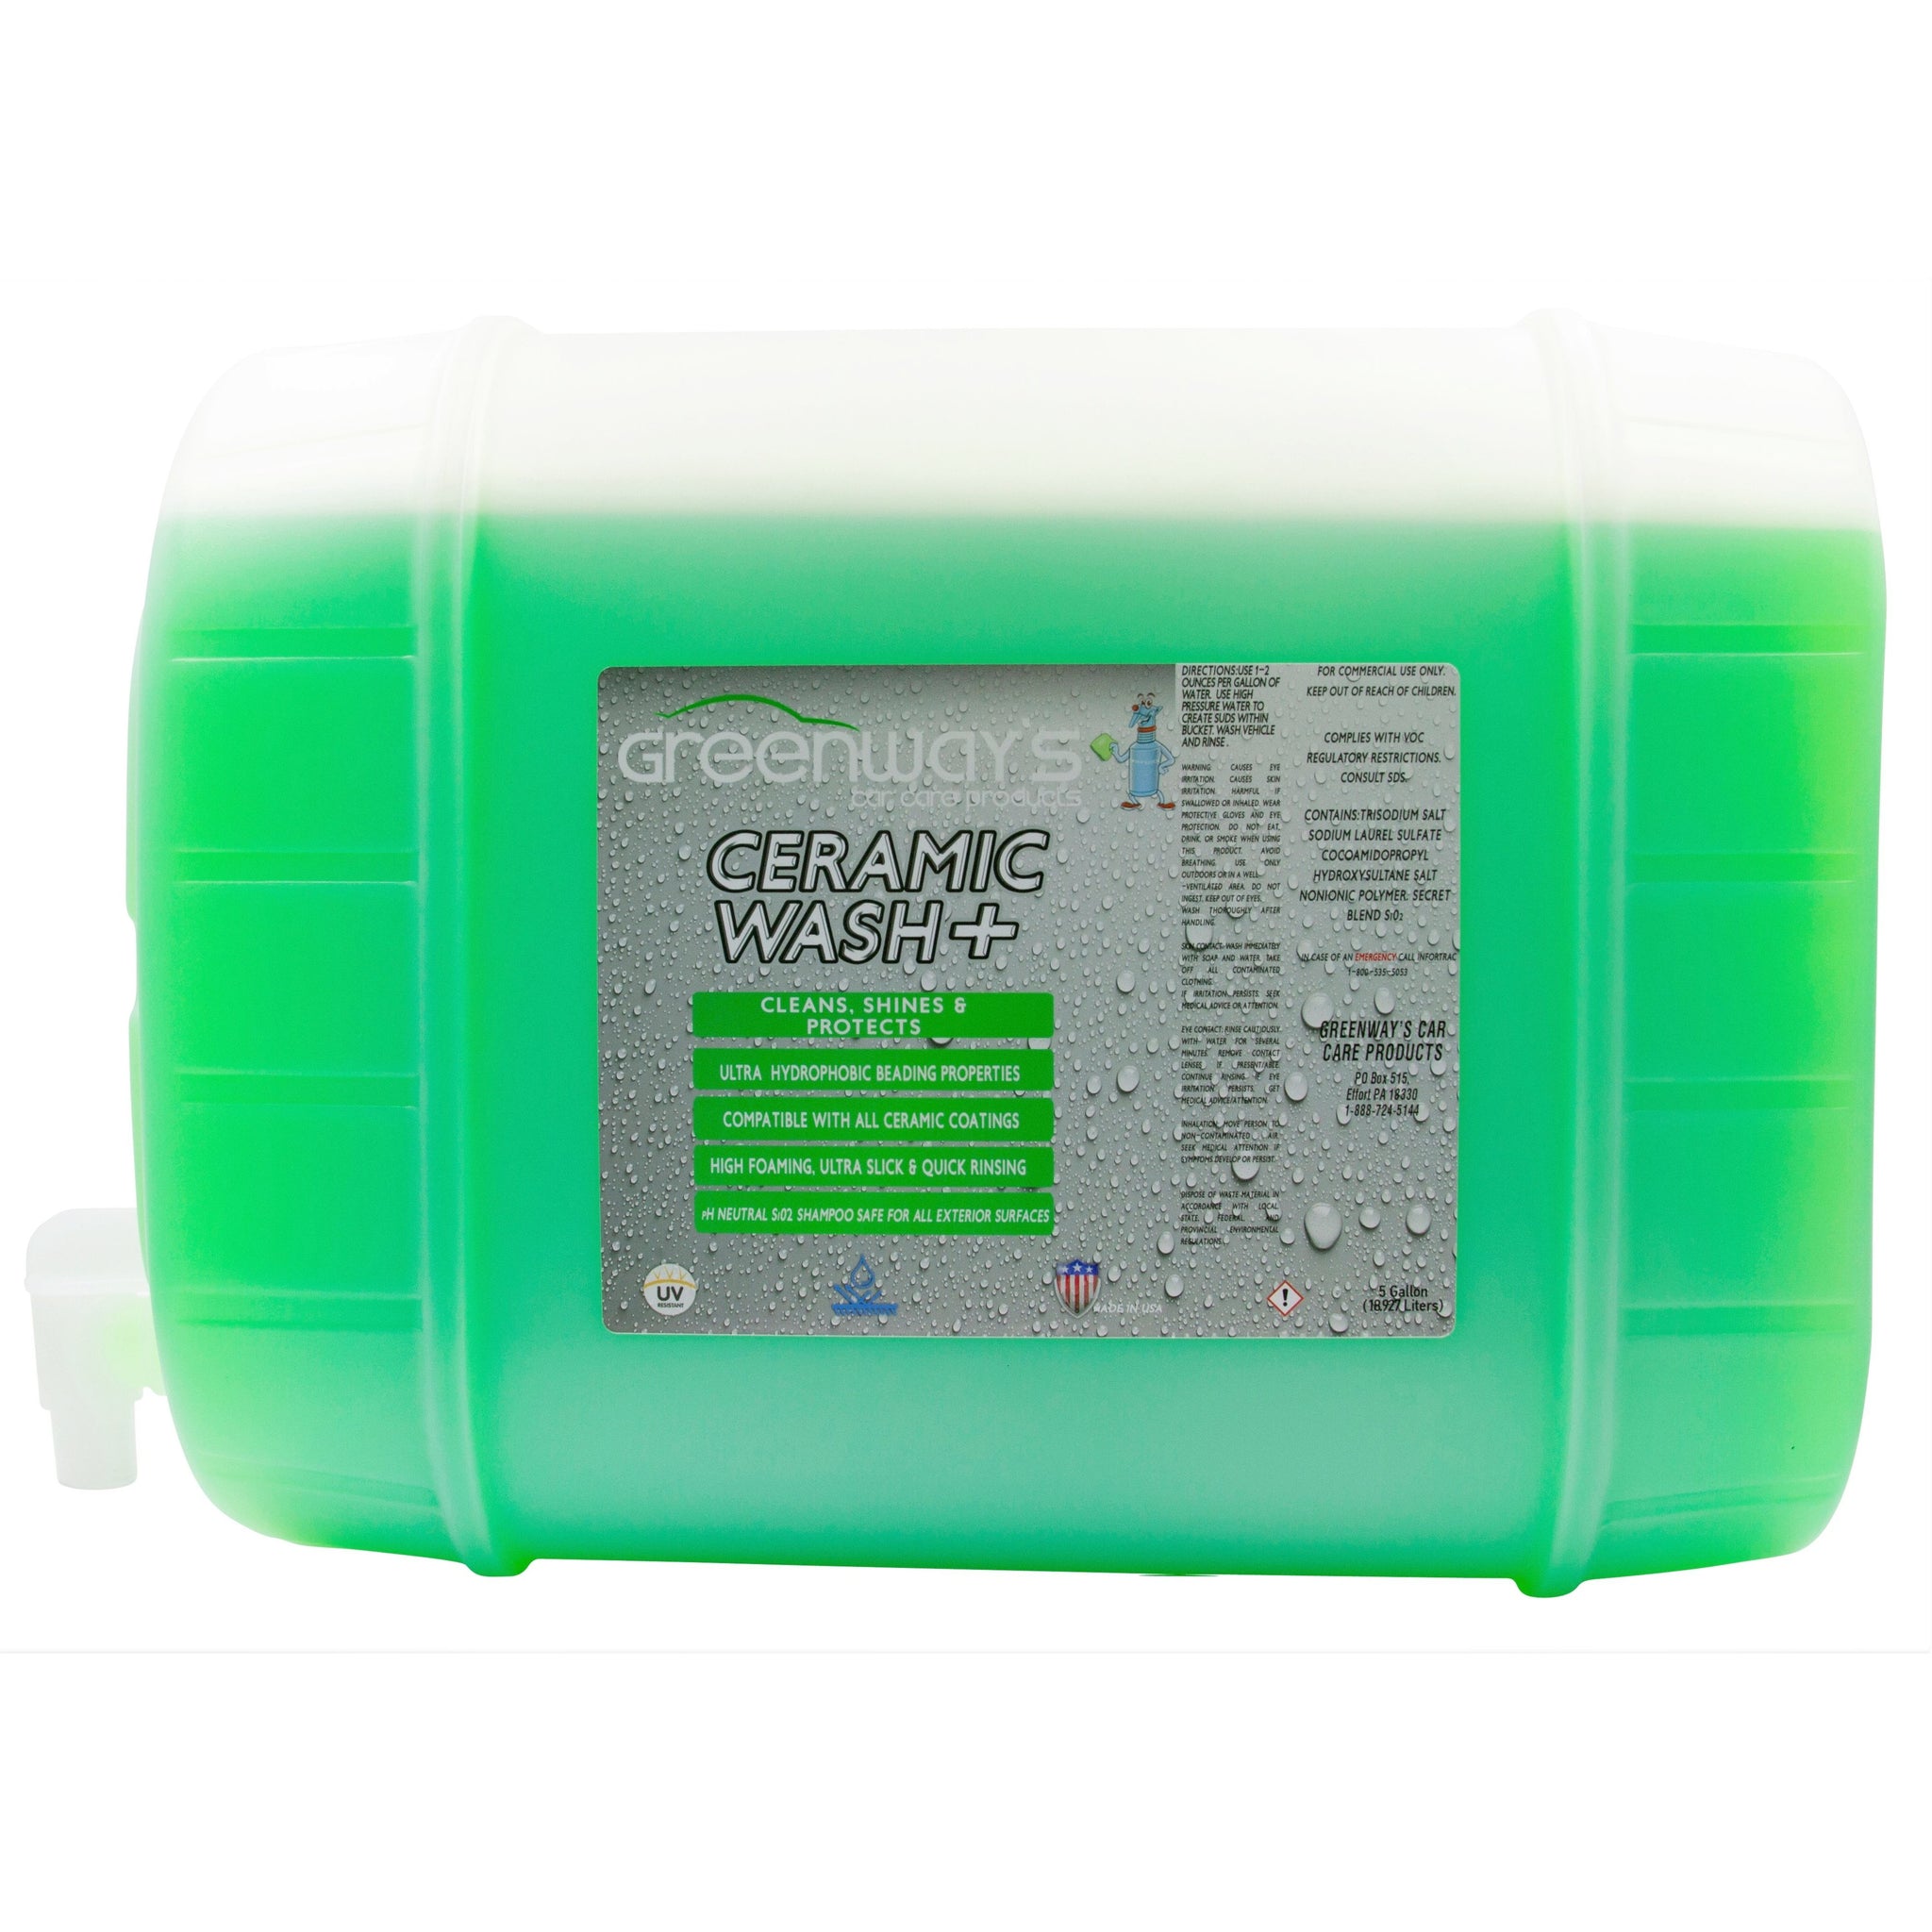 Greenway’s Ceramic Wash +, Si02 ceramic infused highly concentrated car soap with extreme foam and custom scent, 5 gallons.